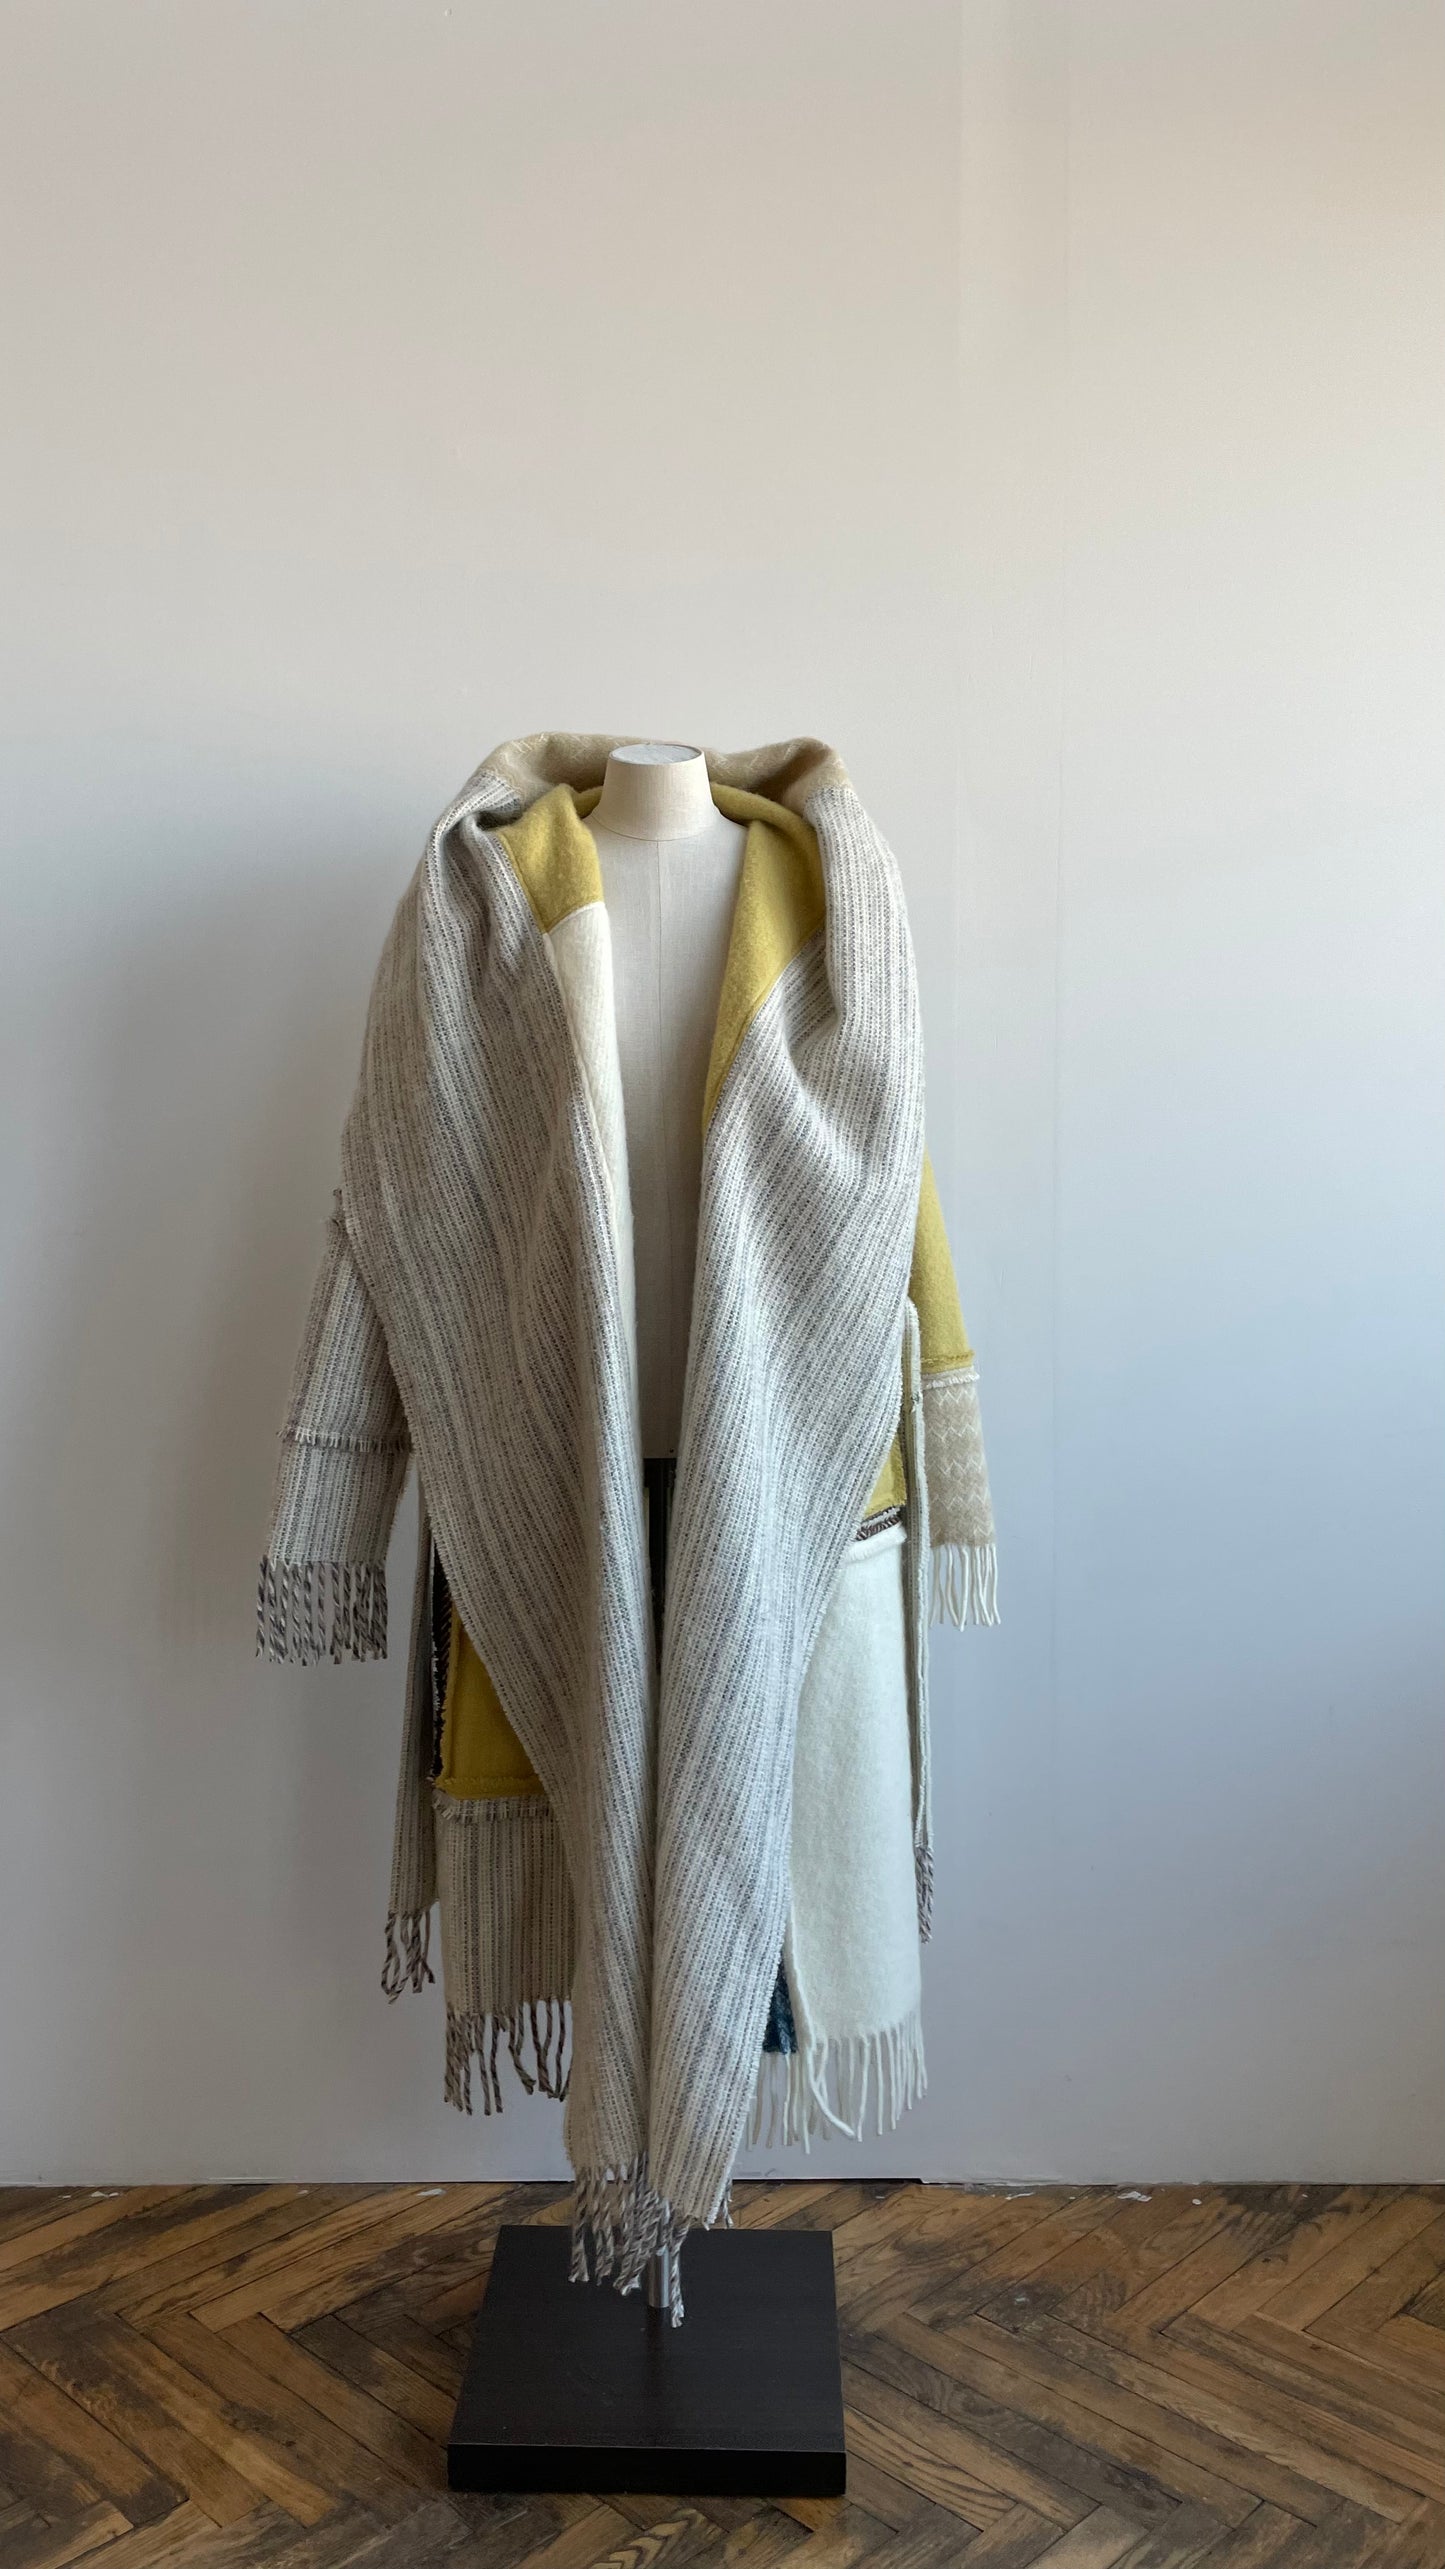 LIEPA Wool maxi coat (Size XS/S) in light colours with pop of yellow and blue